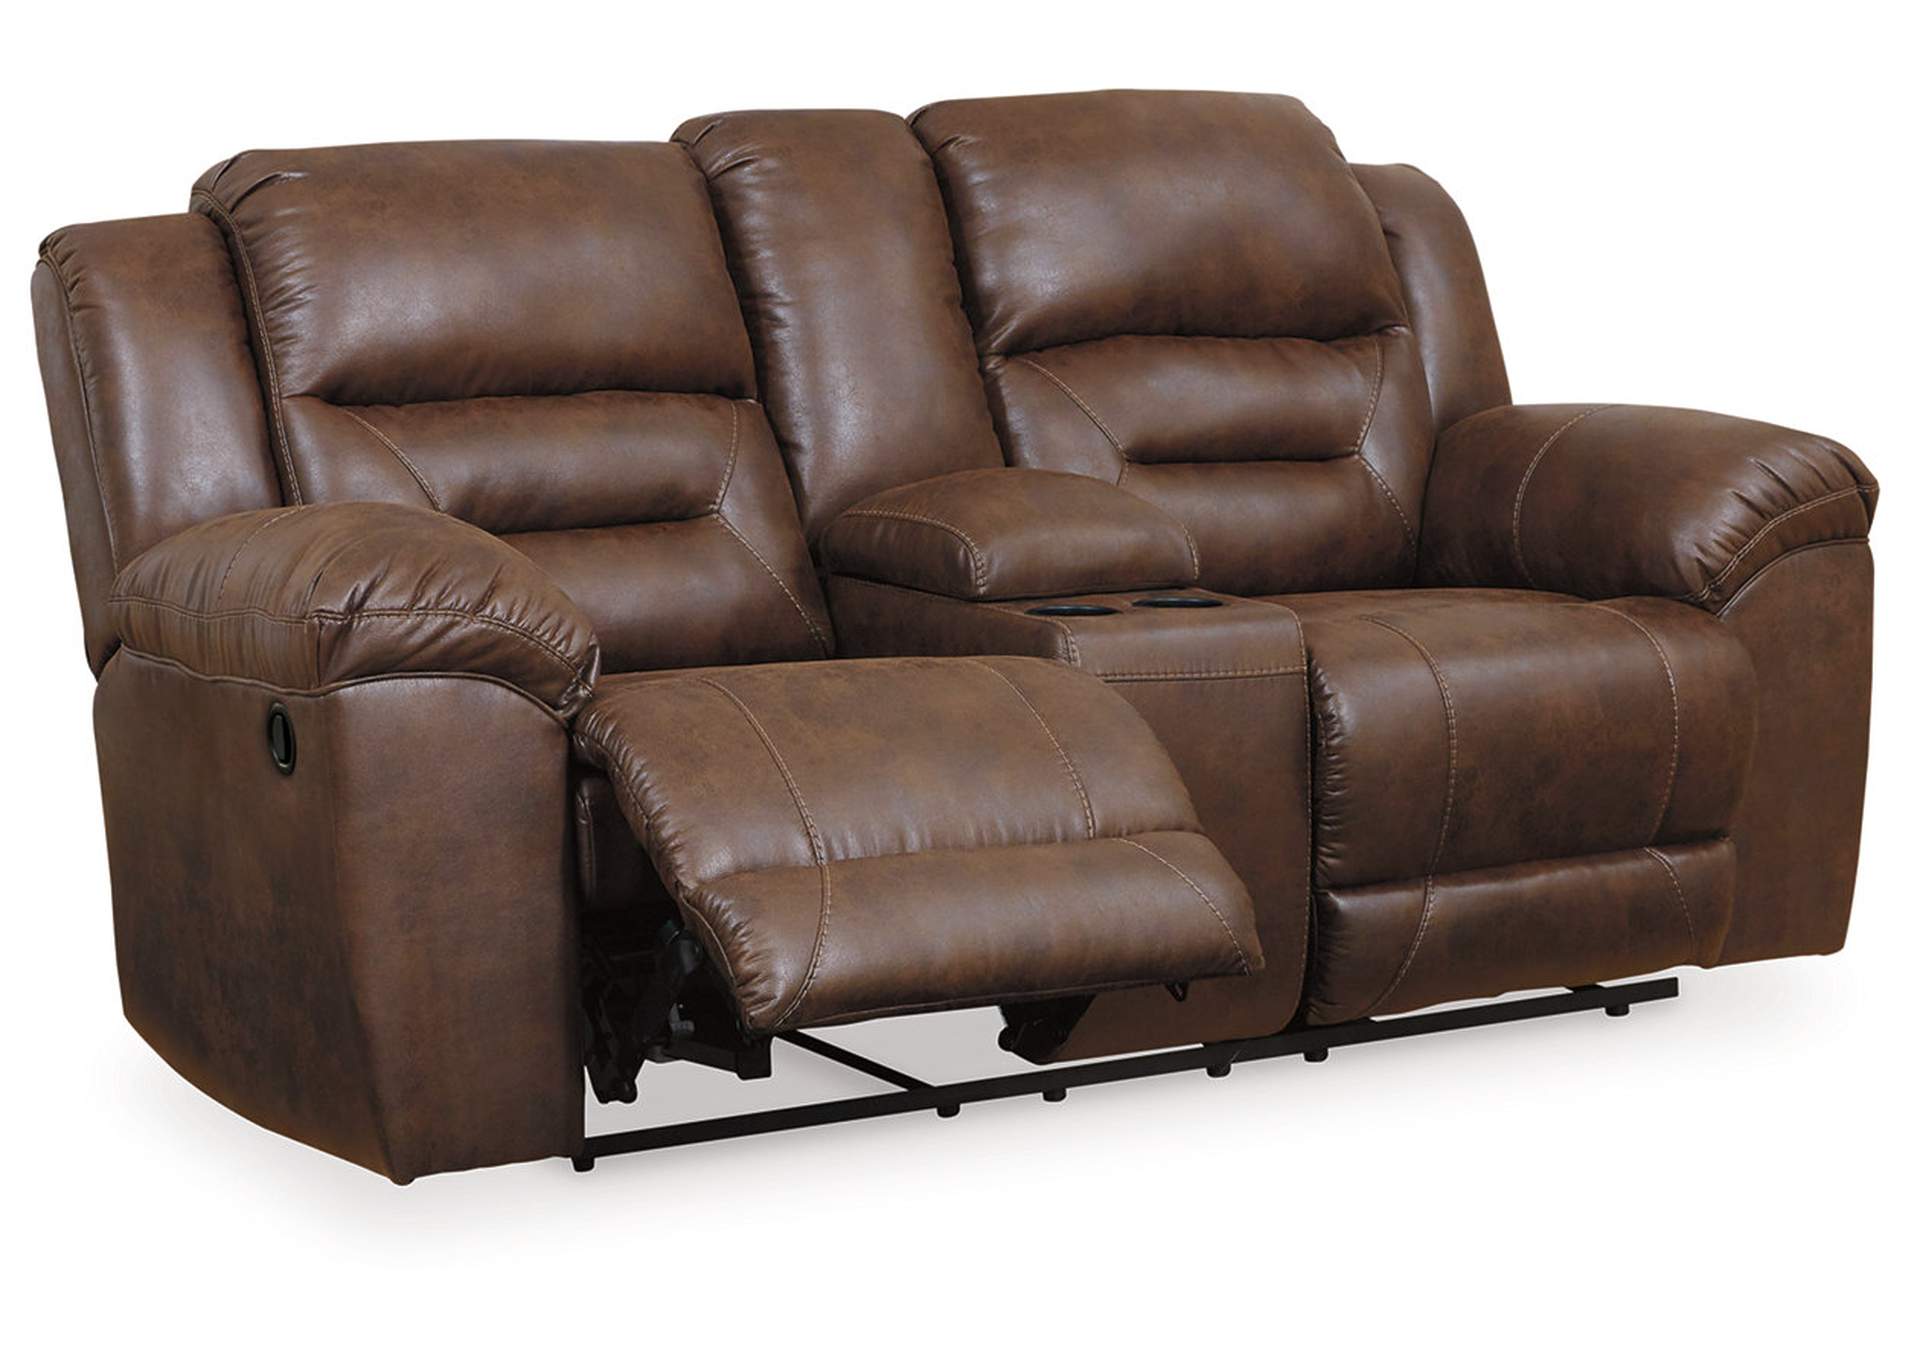 Stoneland Reclining Sofa, Loveseat and Recliner,Signature Design By Ashley